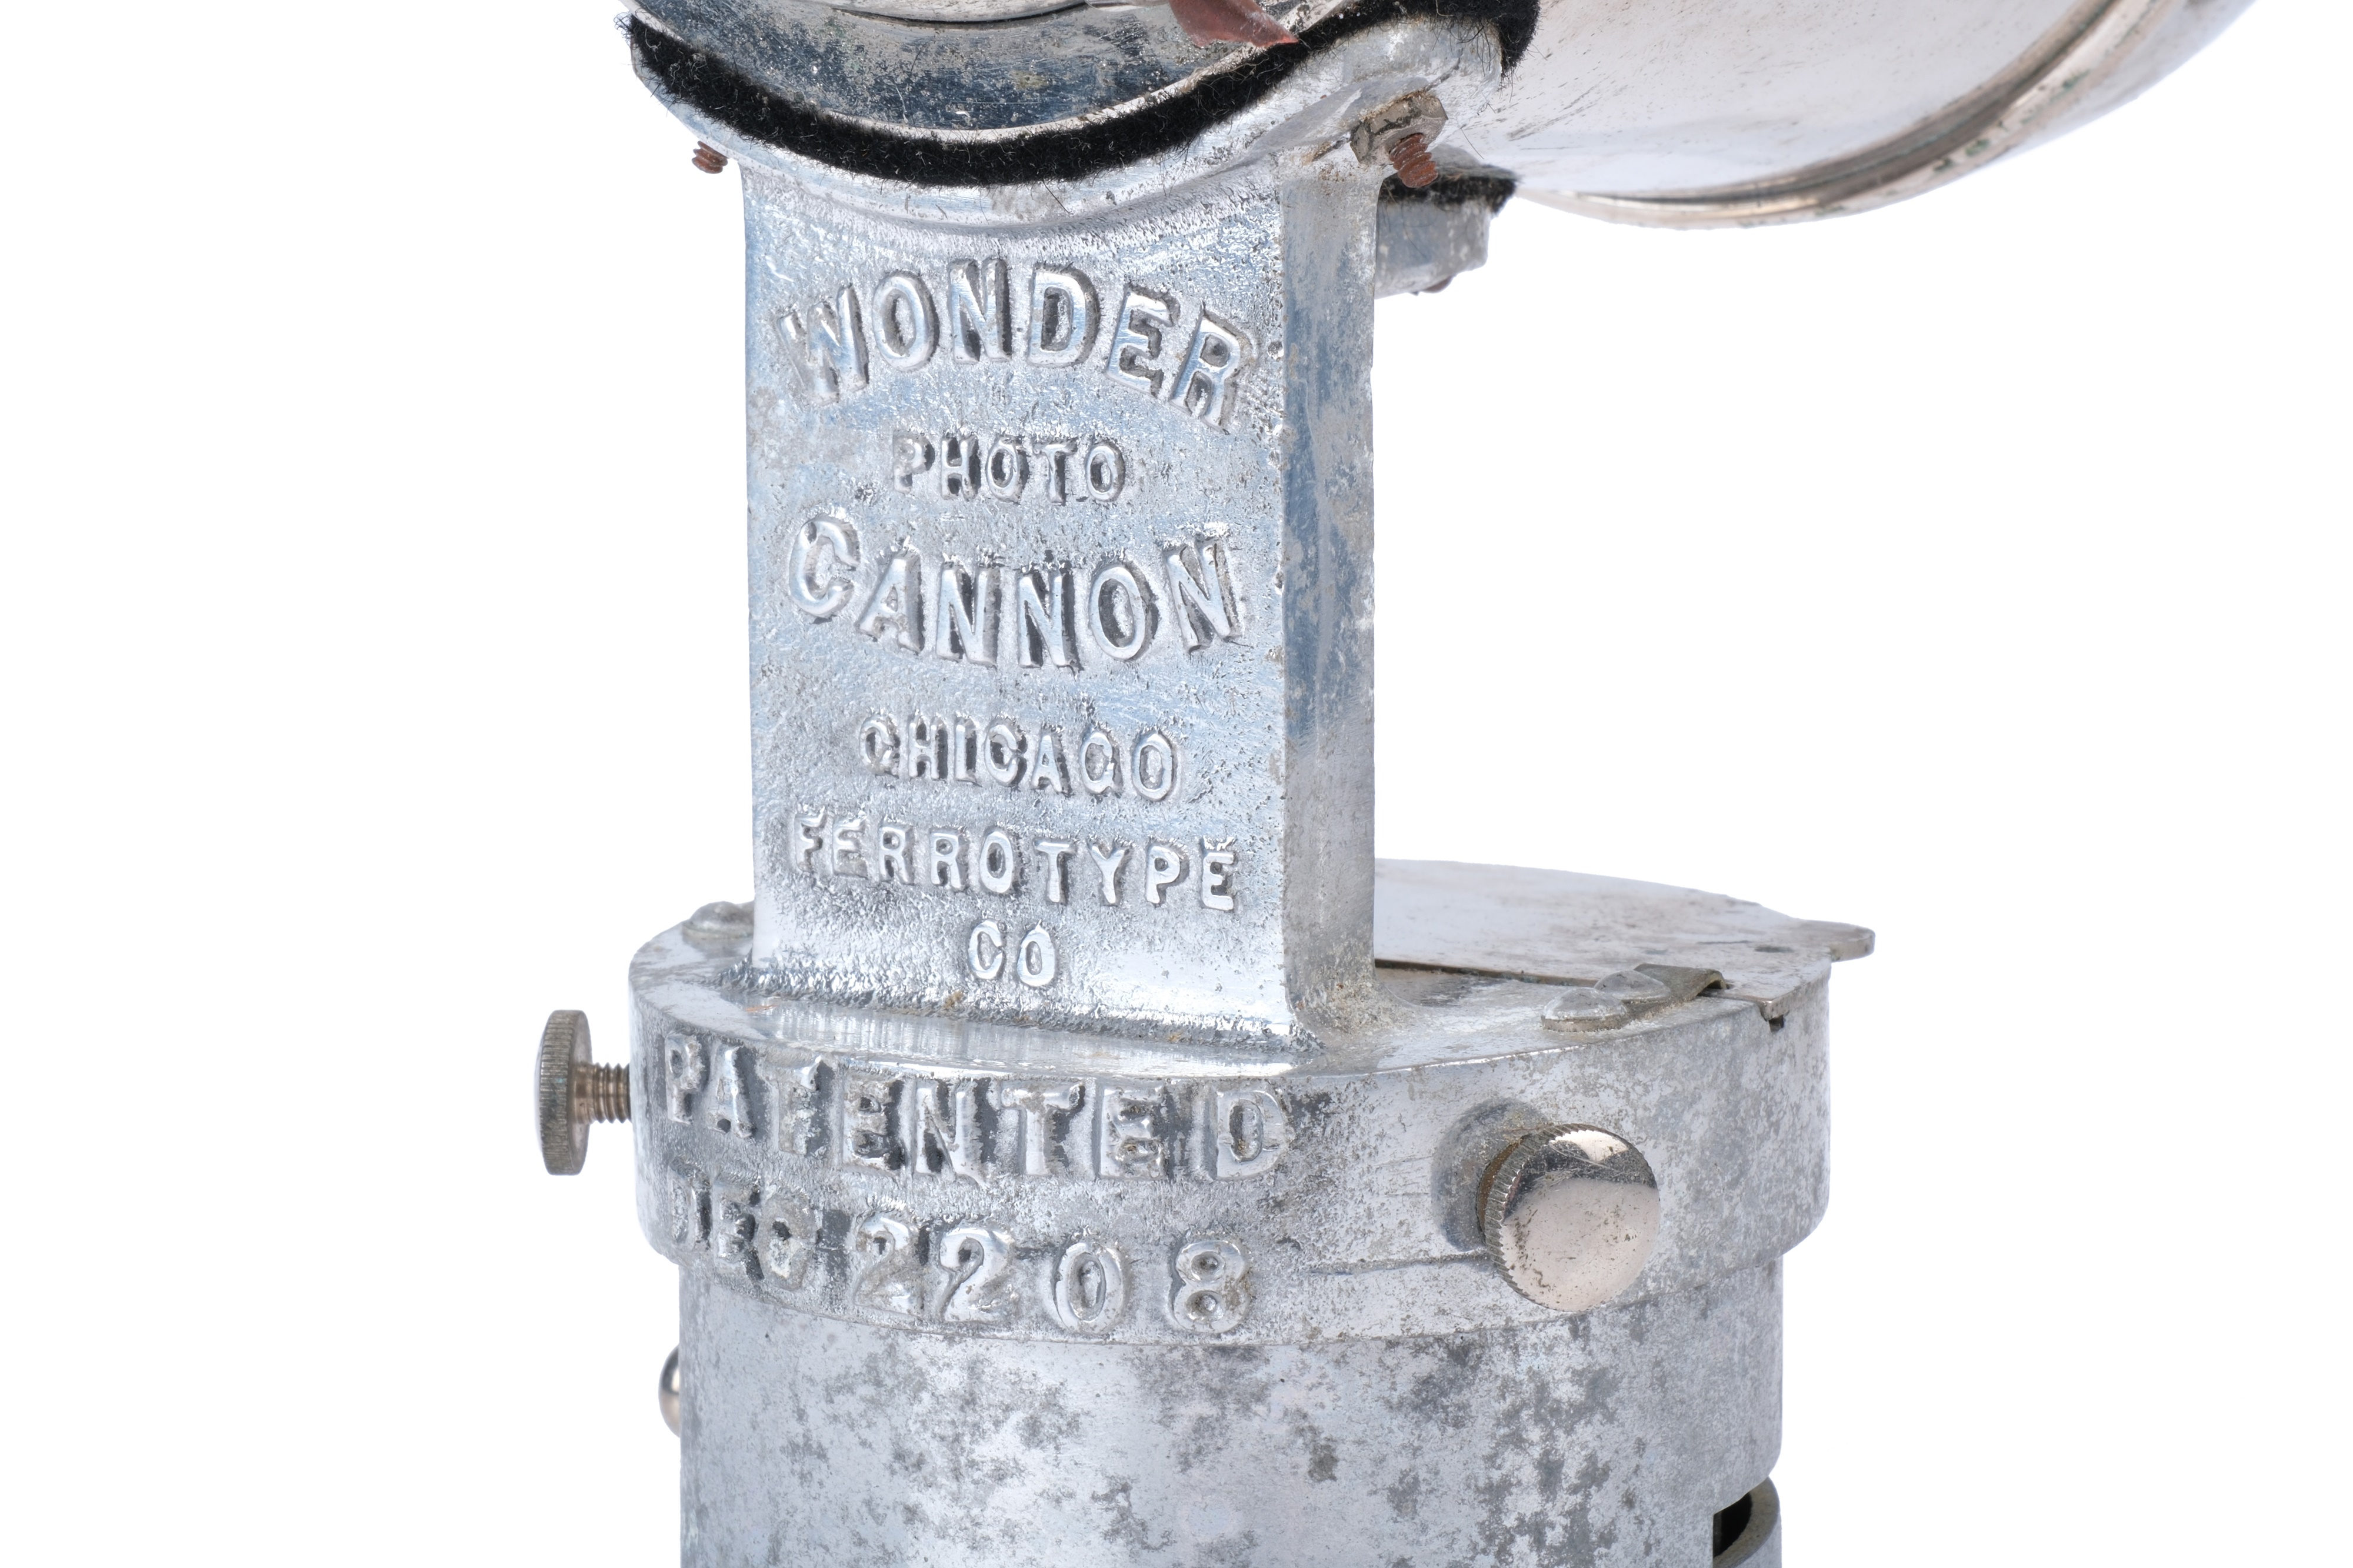 A Chicago Ferrotype Photo Wonder Cannon Camera, - Image 4 of 5